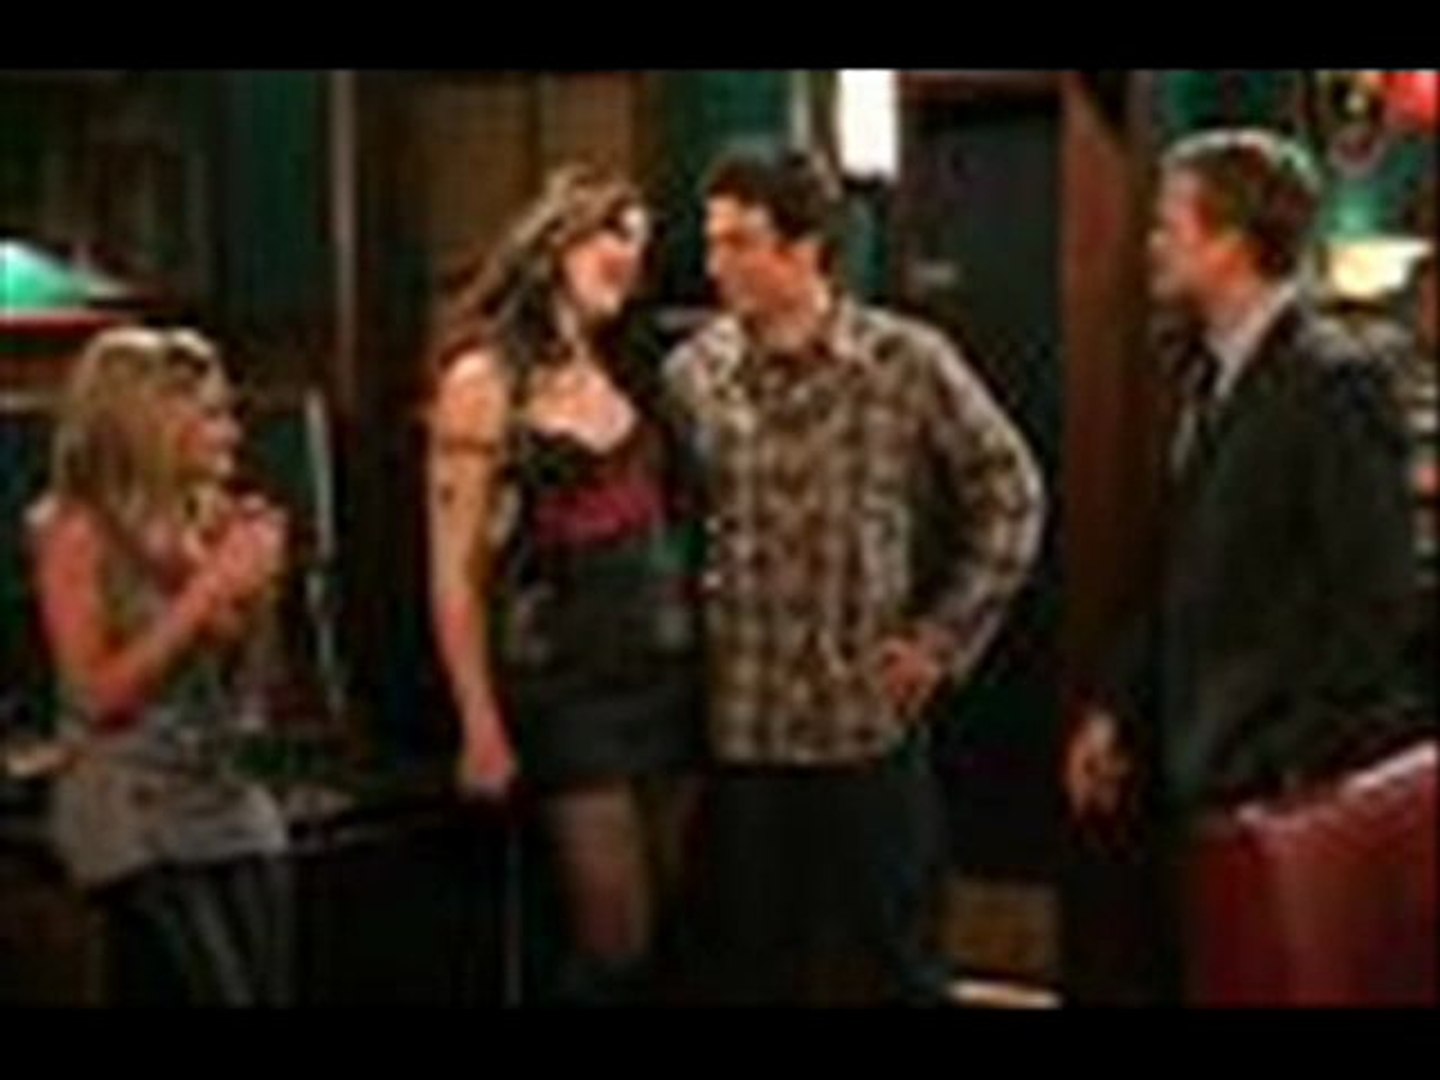 HOW I MET YOUR MOTHER s05e06 506 s5e6 5.6 5x06 - video Dailymotion